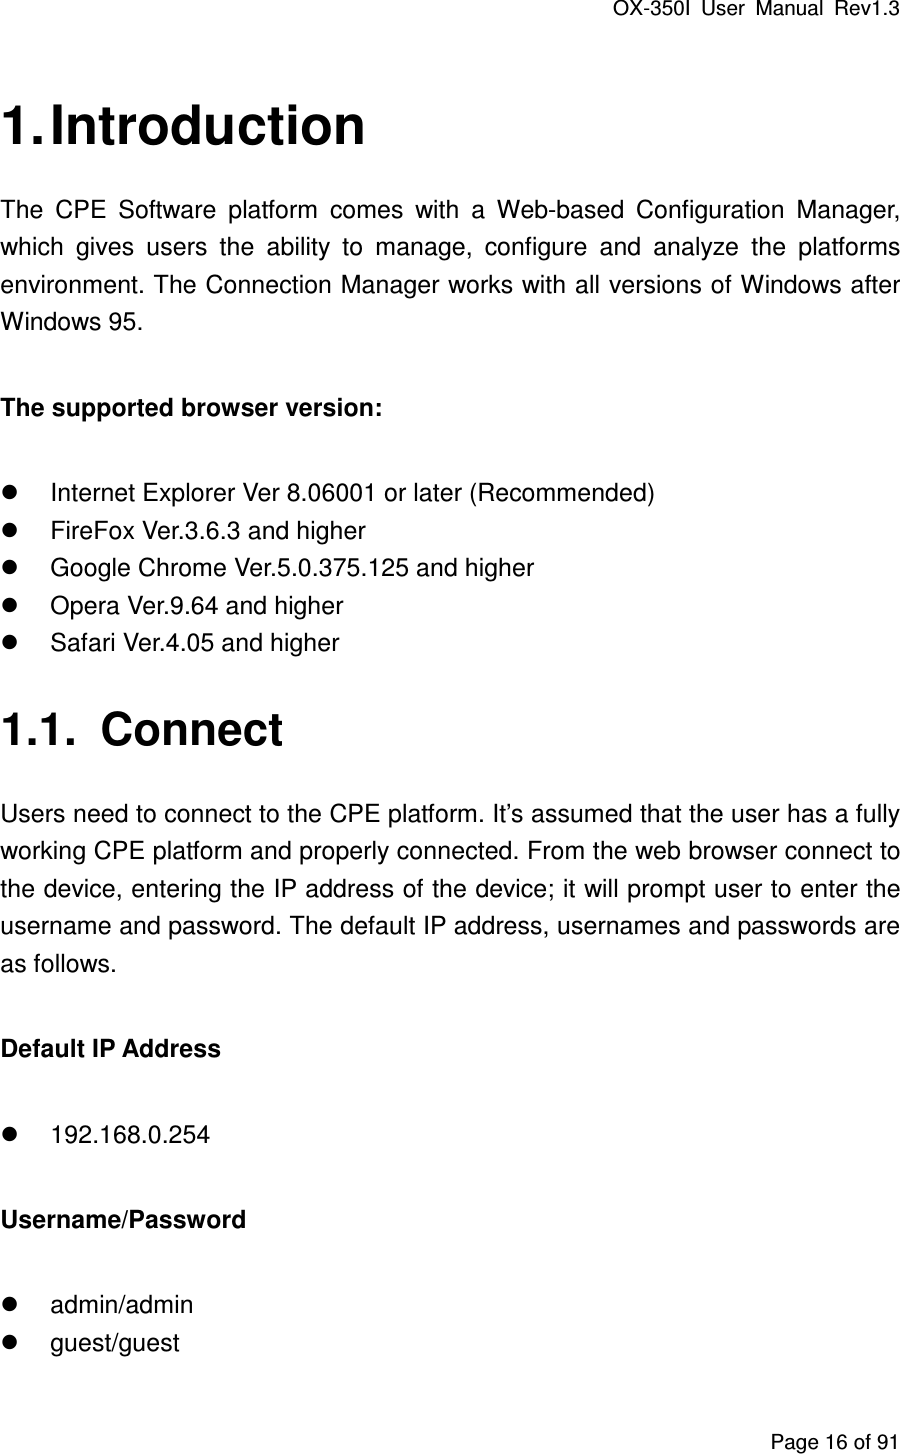 OX-350I  User  Manual  Rev1.3 Page 16 of 91 1. Introduction The  CPE  Software  platform  comes  with  a  Web-based  Configuration  Manager, which  gives  users  the  ability  to  manage,  configure  and  analyze  the  platforms environment. The Connection Manager works with all versions of Windows after Windows 95. The supported browser version:   Internet Explorer Ver 8.06001 or later (Recommended)   FireFox Ver.3.6.3 and higher   Google Chrome Ver.5.0.375.125 and higher   Opera Ver.9.64 and higher   Safari Ver.4.05 and higher 1.1.  Connect Users need to connect to the CPE platform. It’s assumed that the user has a fully working CPE platform and properly connected. From the web browser connect to the device, entering the IP address of the device; it will prompt user to enter the username and password. The default IP address, usernames and passwords are as follows. Default IP Address   192.168.0.254 Username/Password   admin/admin   guest/guest 